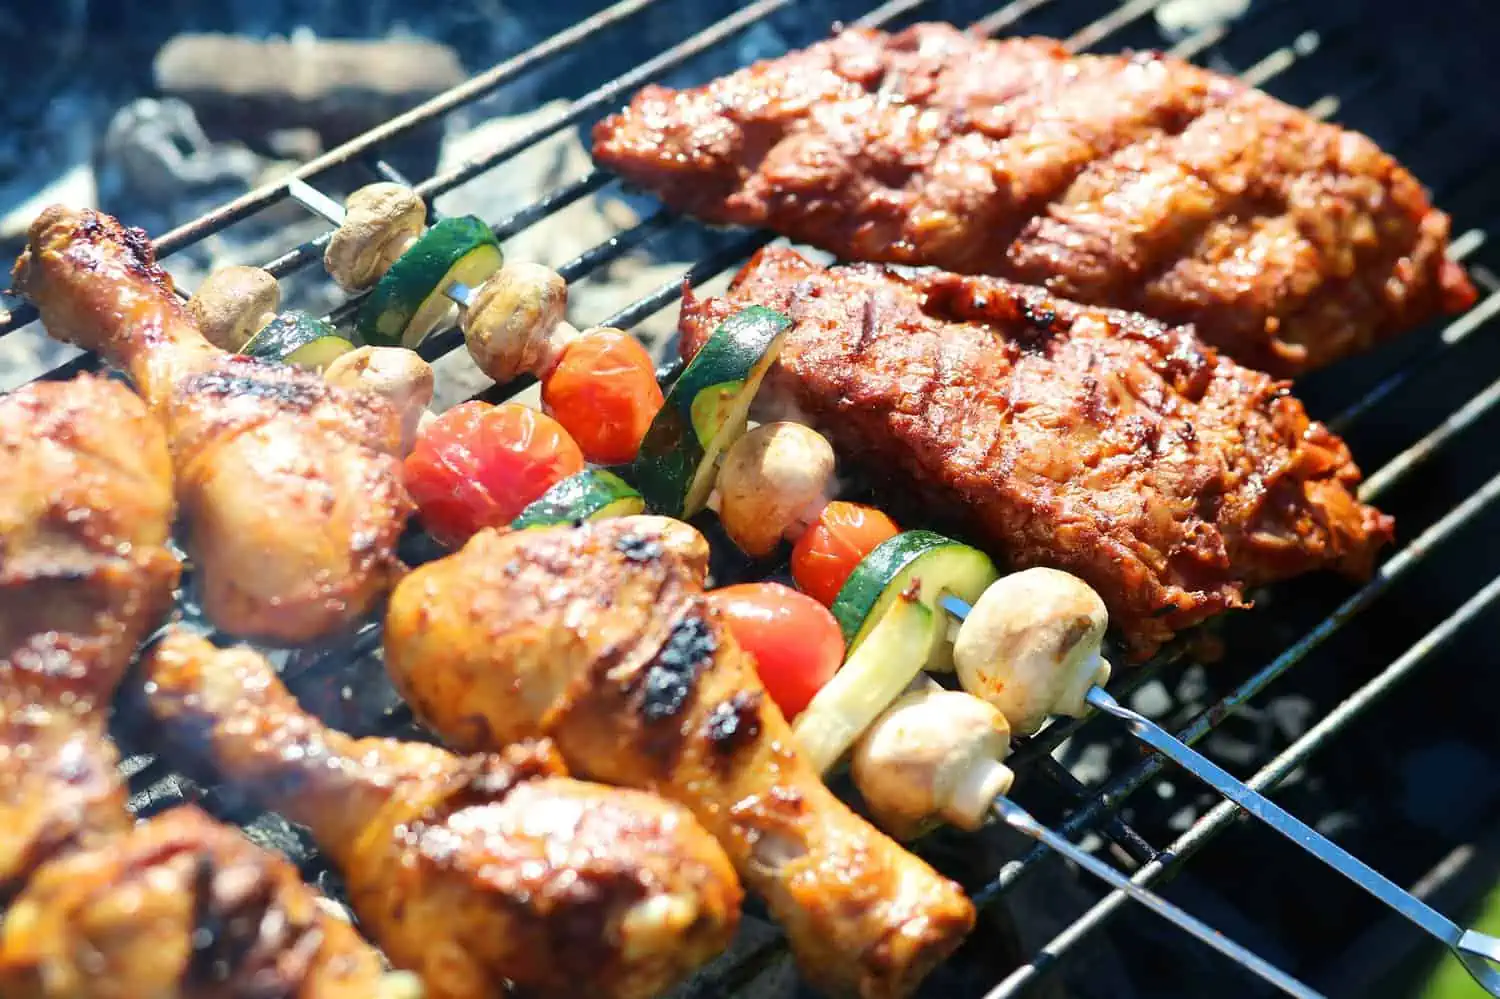 Assorted meat and vegetables on barbecue griller